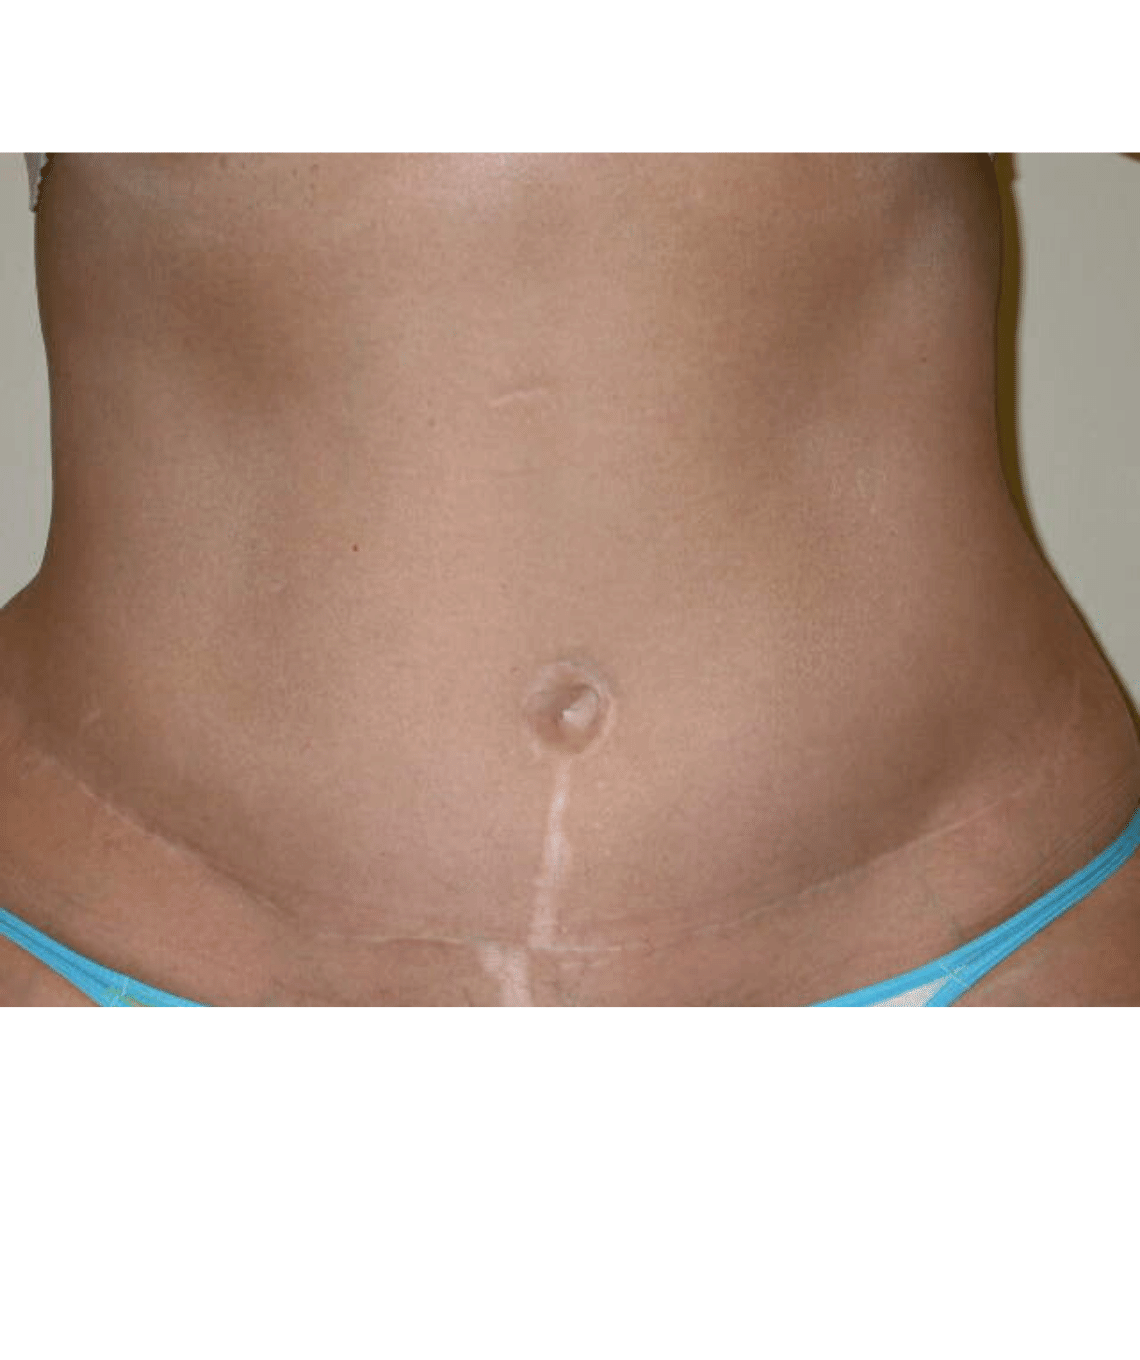 tummy-tuck-before-and-after-photos-after-prma-plastic-surgery-case-41